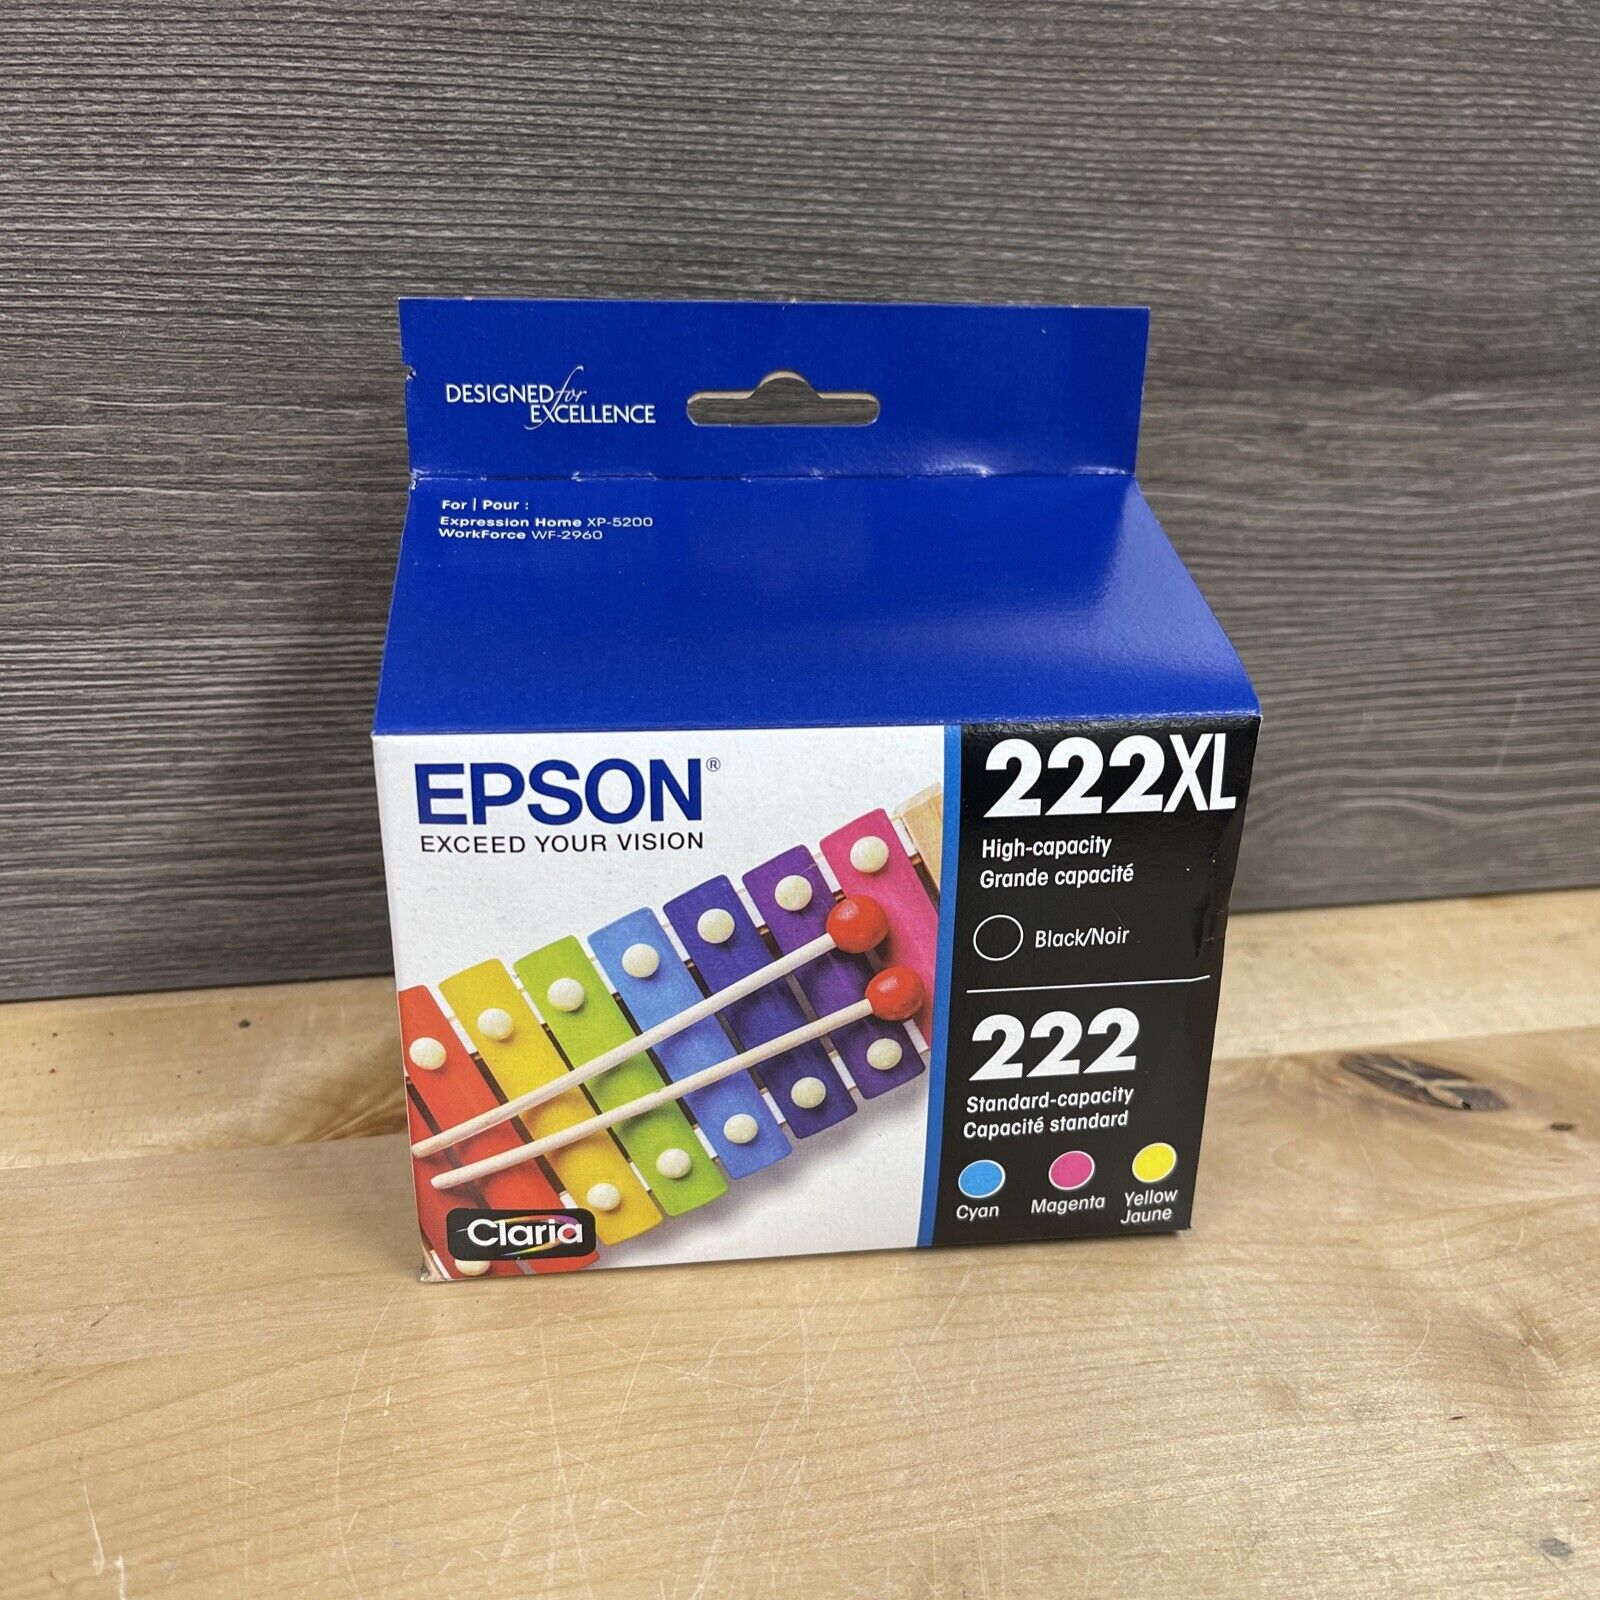 Epson 222XL Black & 222 Cyan Magenta Yellow Ink Cartridges Pack Dated 07/26 New